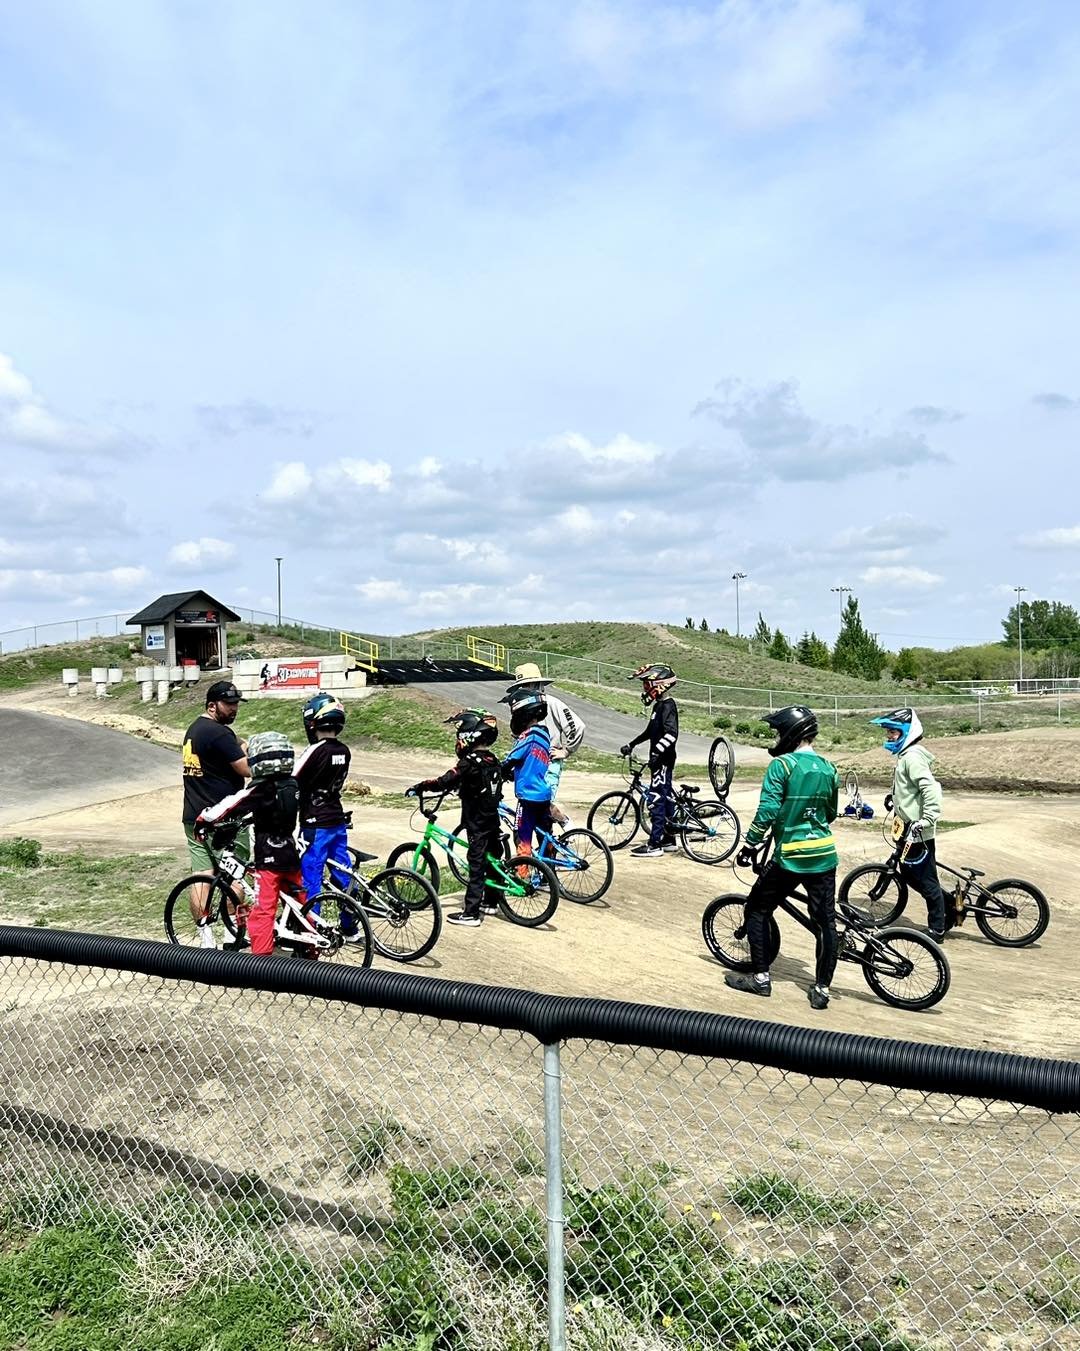 It&rsquo;s May 1st and we are ramping things up for the BMX season! 

SAVE THE DATE 🗓️
We are preparing for a kickoff weekend on May 25-26 that will be a combination of pre-season clinics, meet the coach and board members, BMX 101 for parents, and a